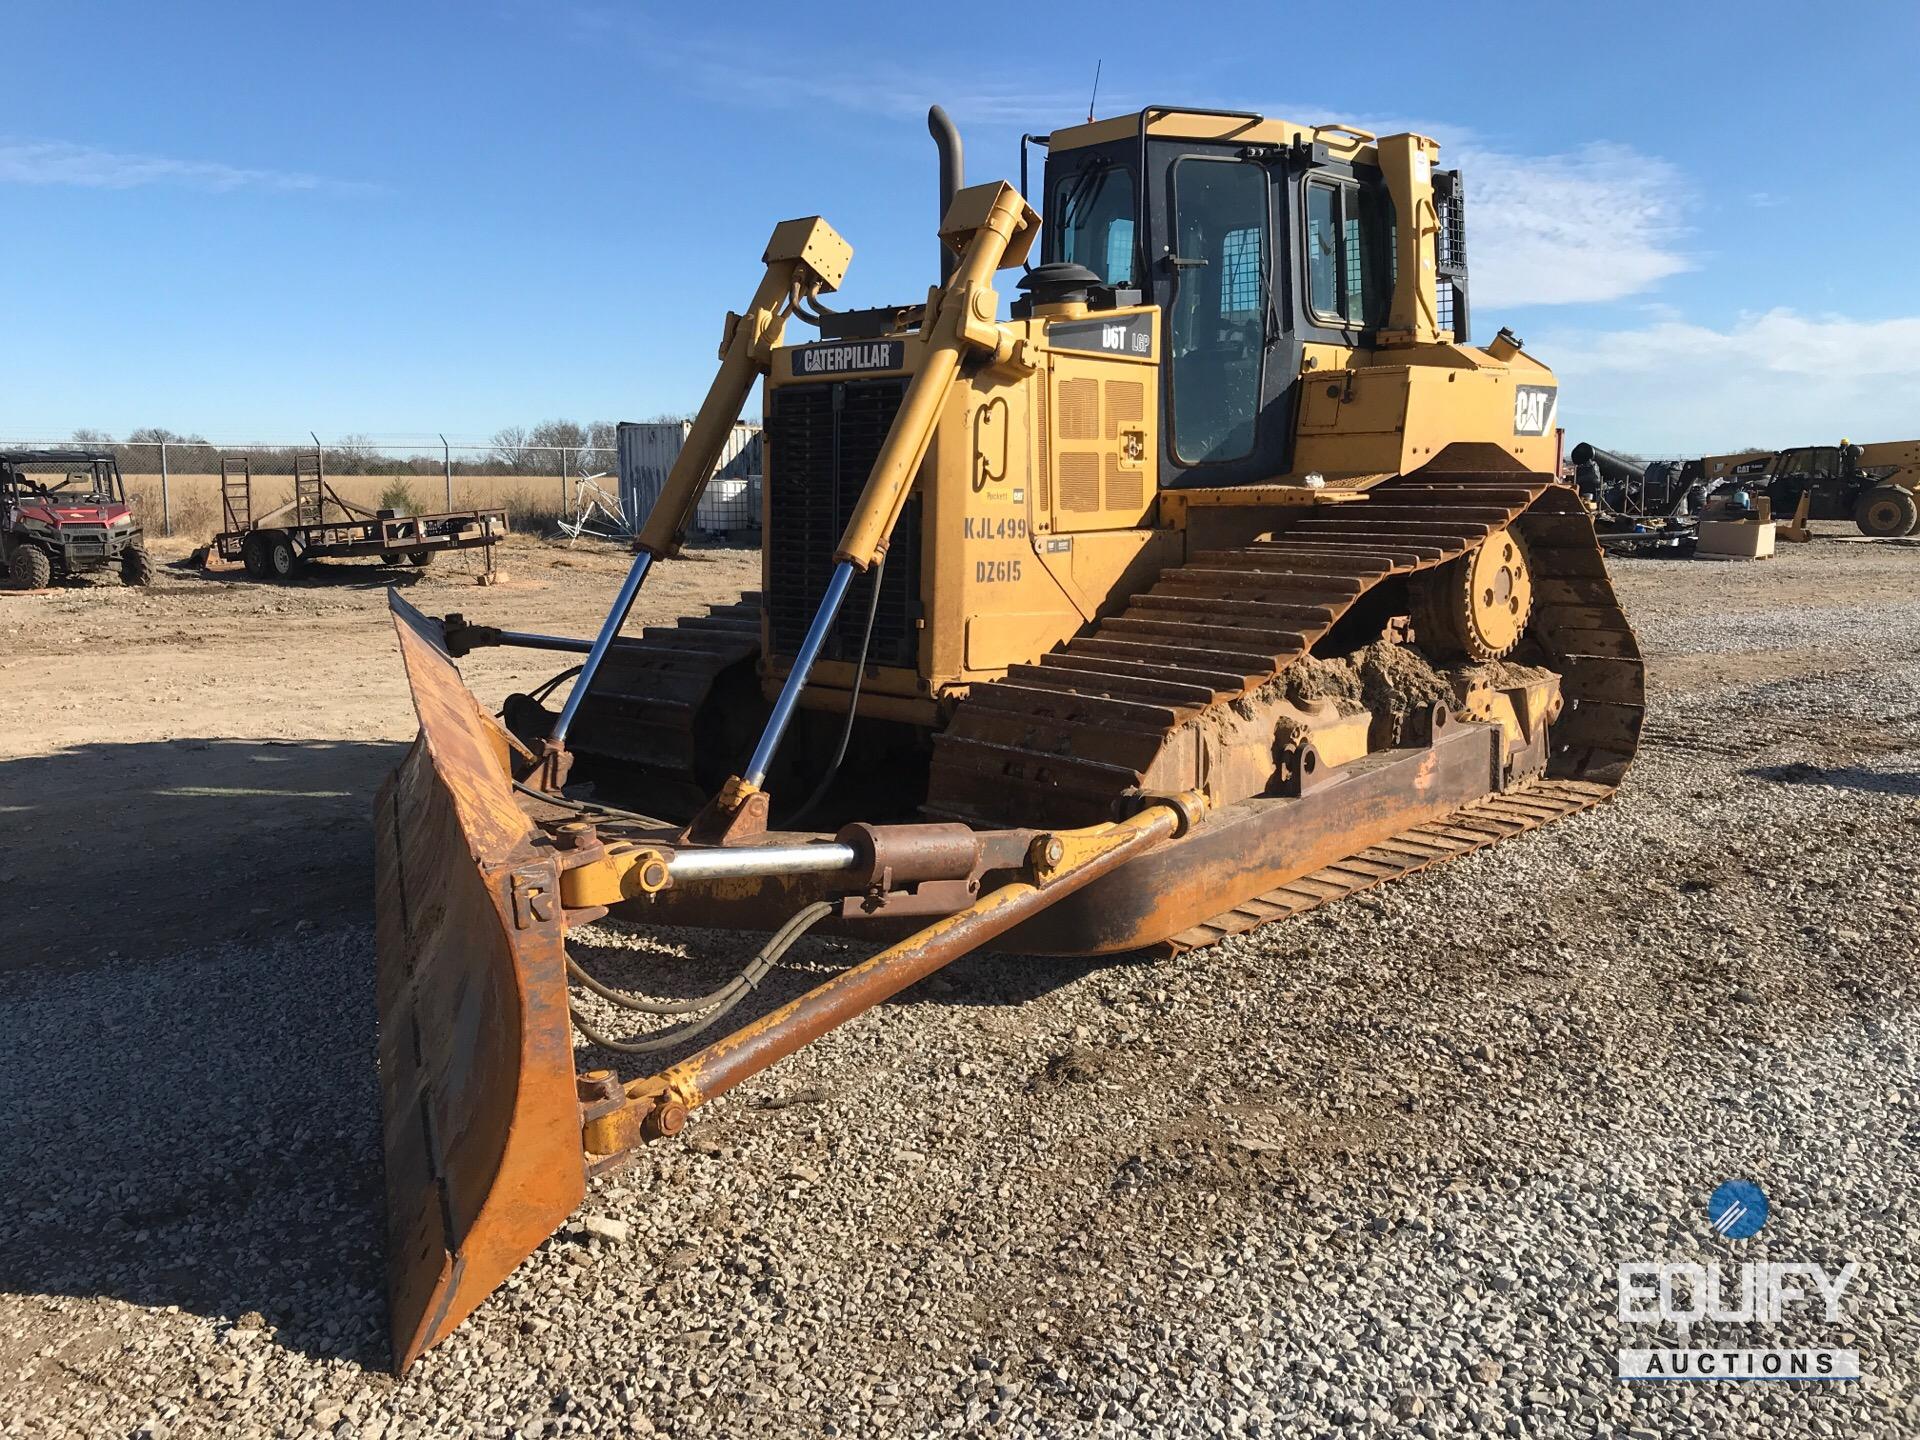 Industrial Auction News 522